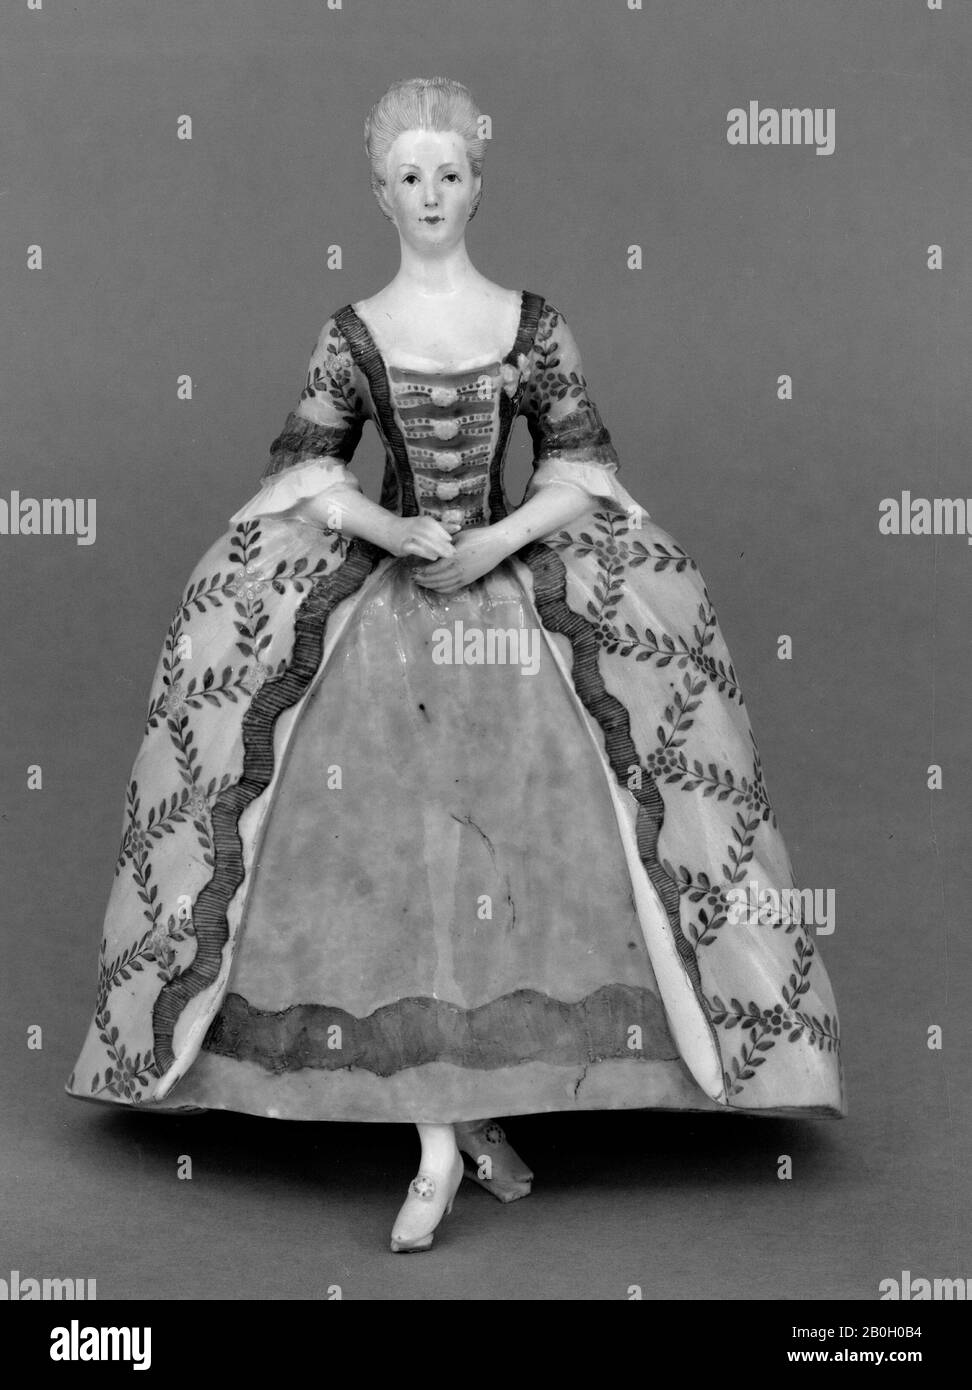 Unknown, Statuette: Court Lady, 19th Century, Hard-paste porcelain, Overall: 4 1/4 x 7 7/8 x 5 1/2 in. (10.8 x 20 x 14 cm Stock Photo